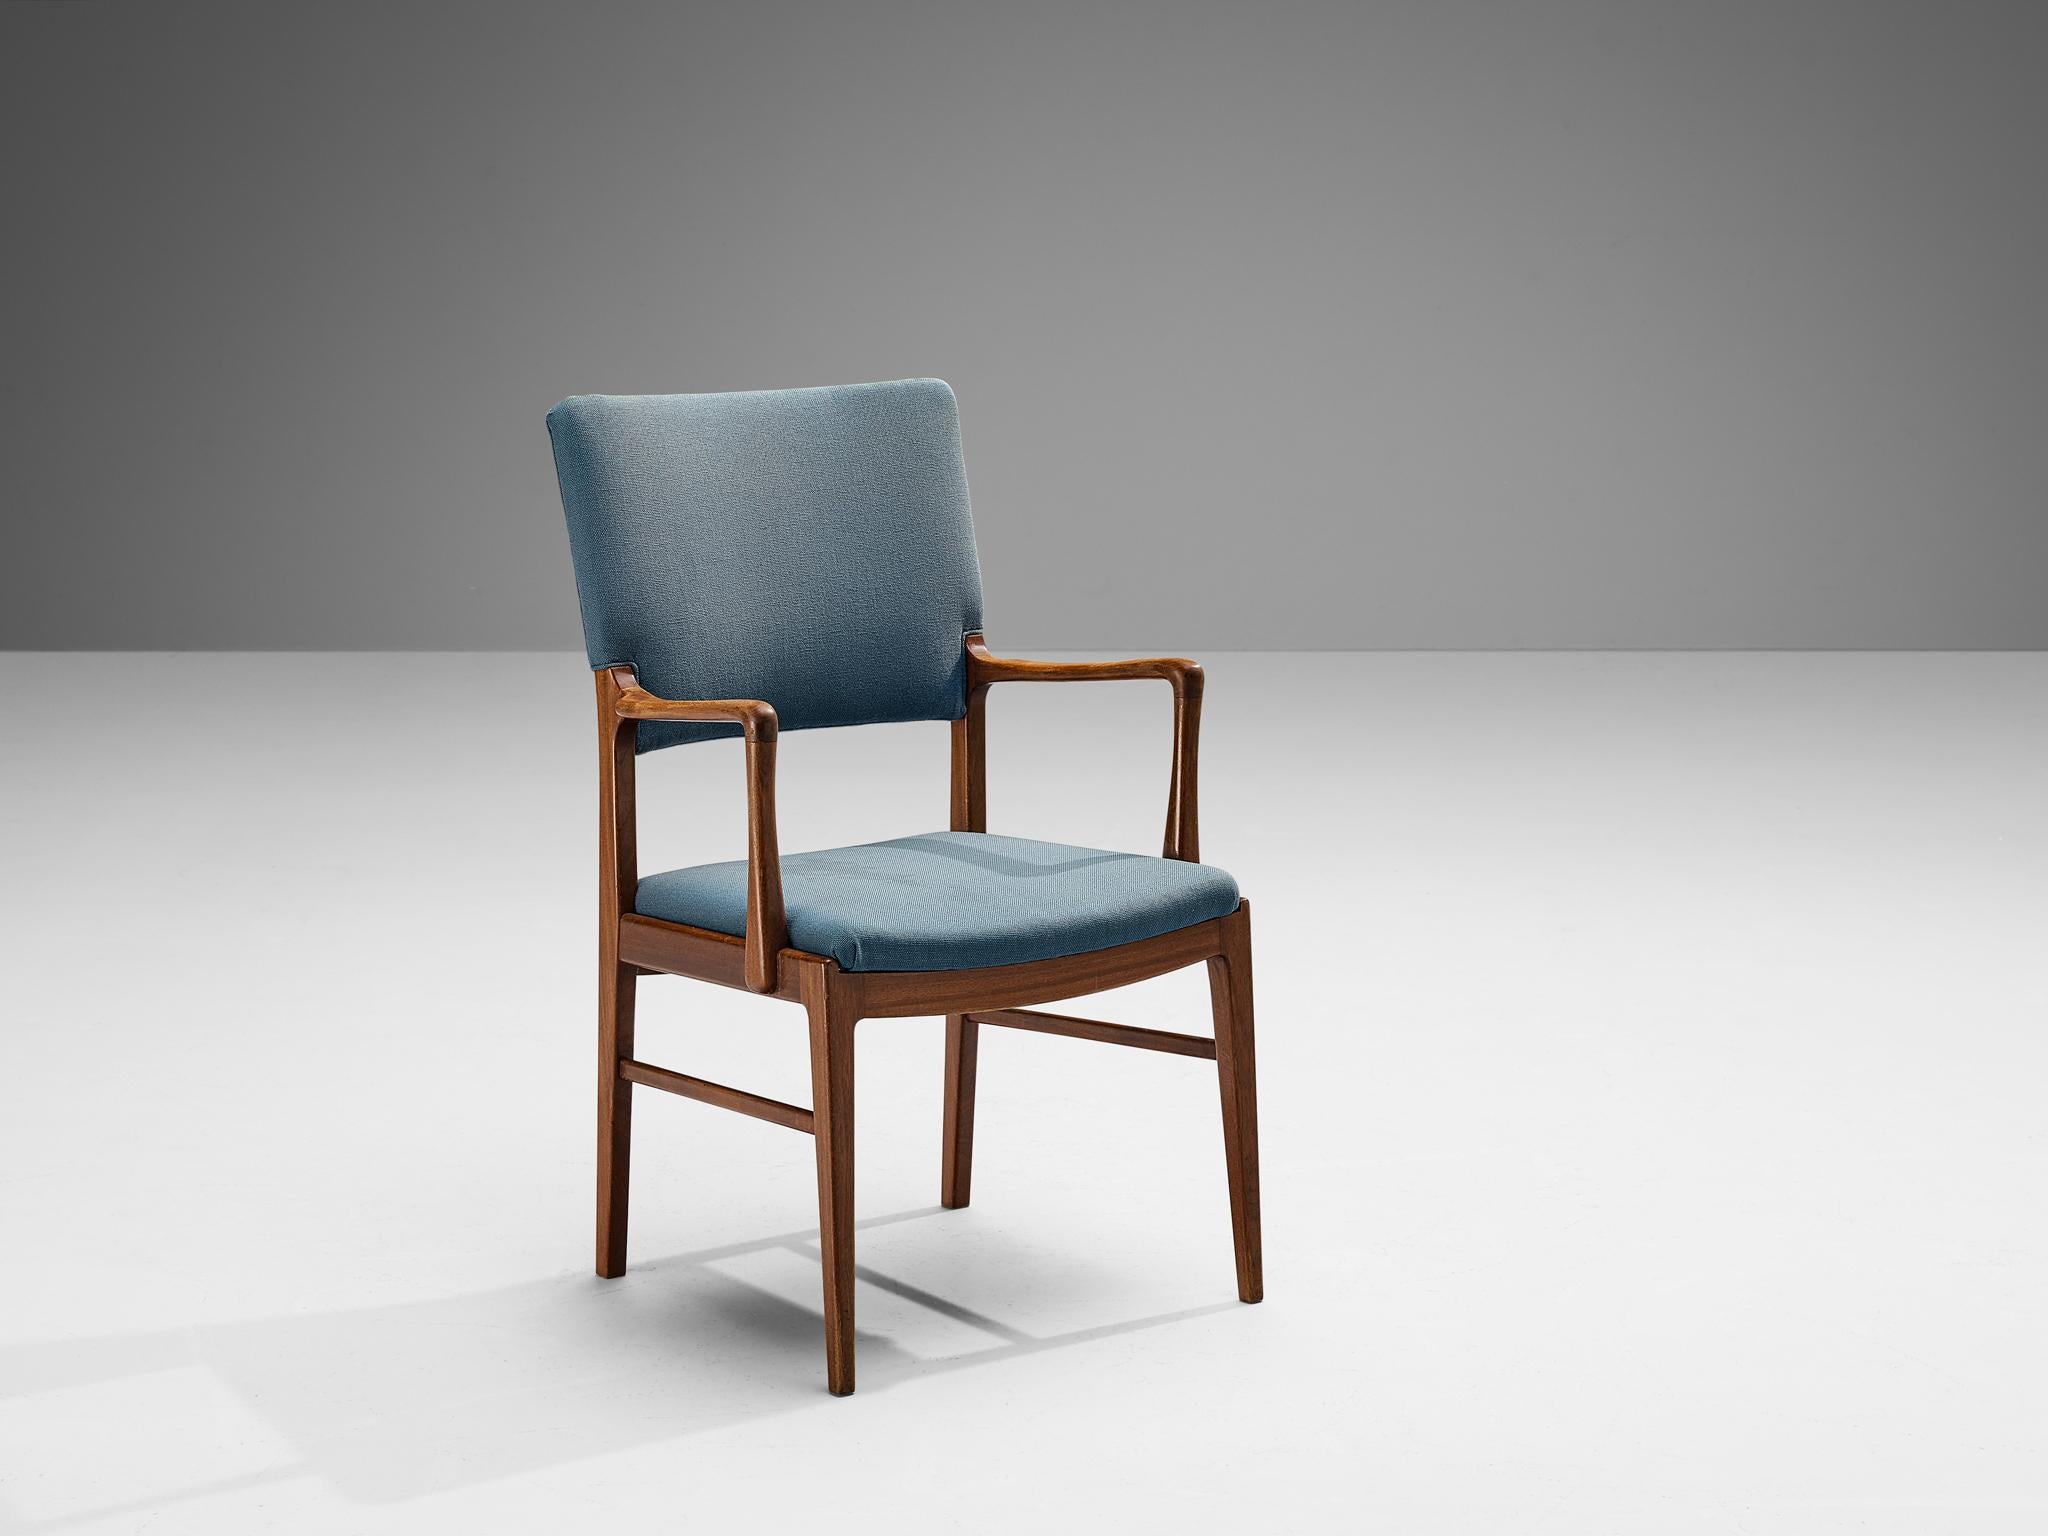 Armchair, fabric, mahogany, Denmark, 1960s

This armchair of Danish origin is characterized by excellent craftsmanship and an elegant silhouette. The frame has an organic appearance due to the subtle curves in the armrests, further complemented by